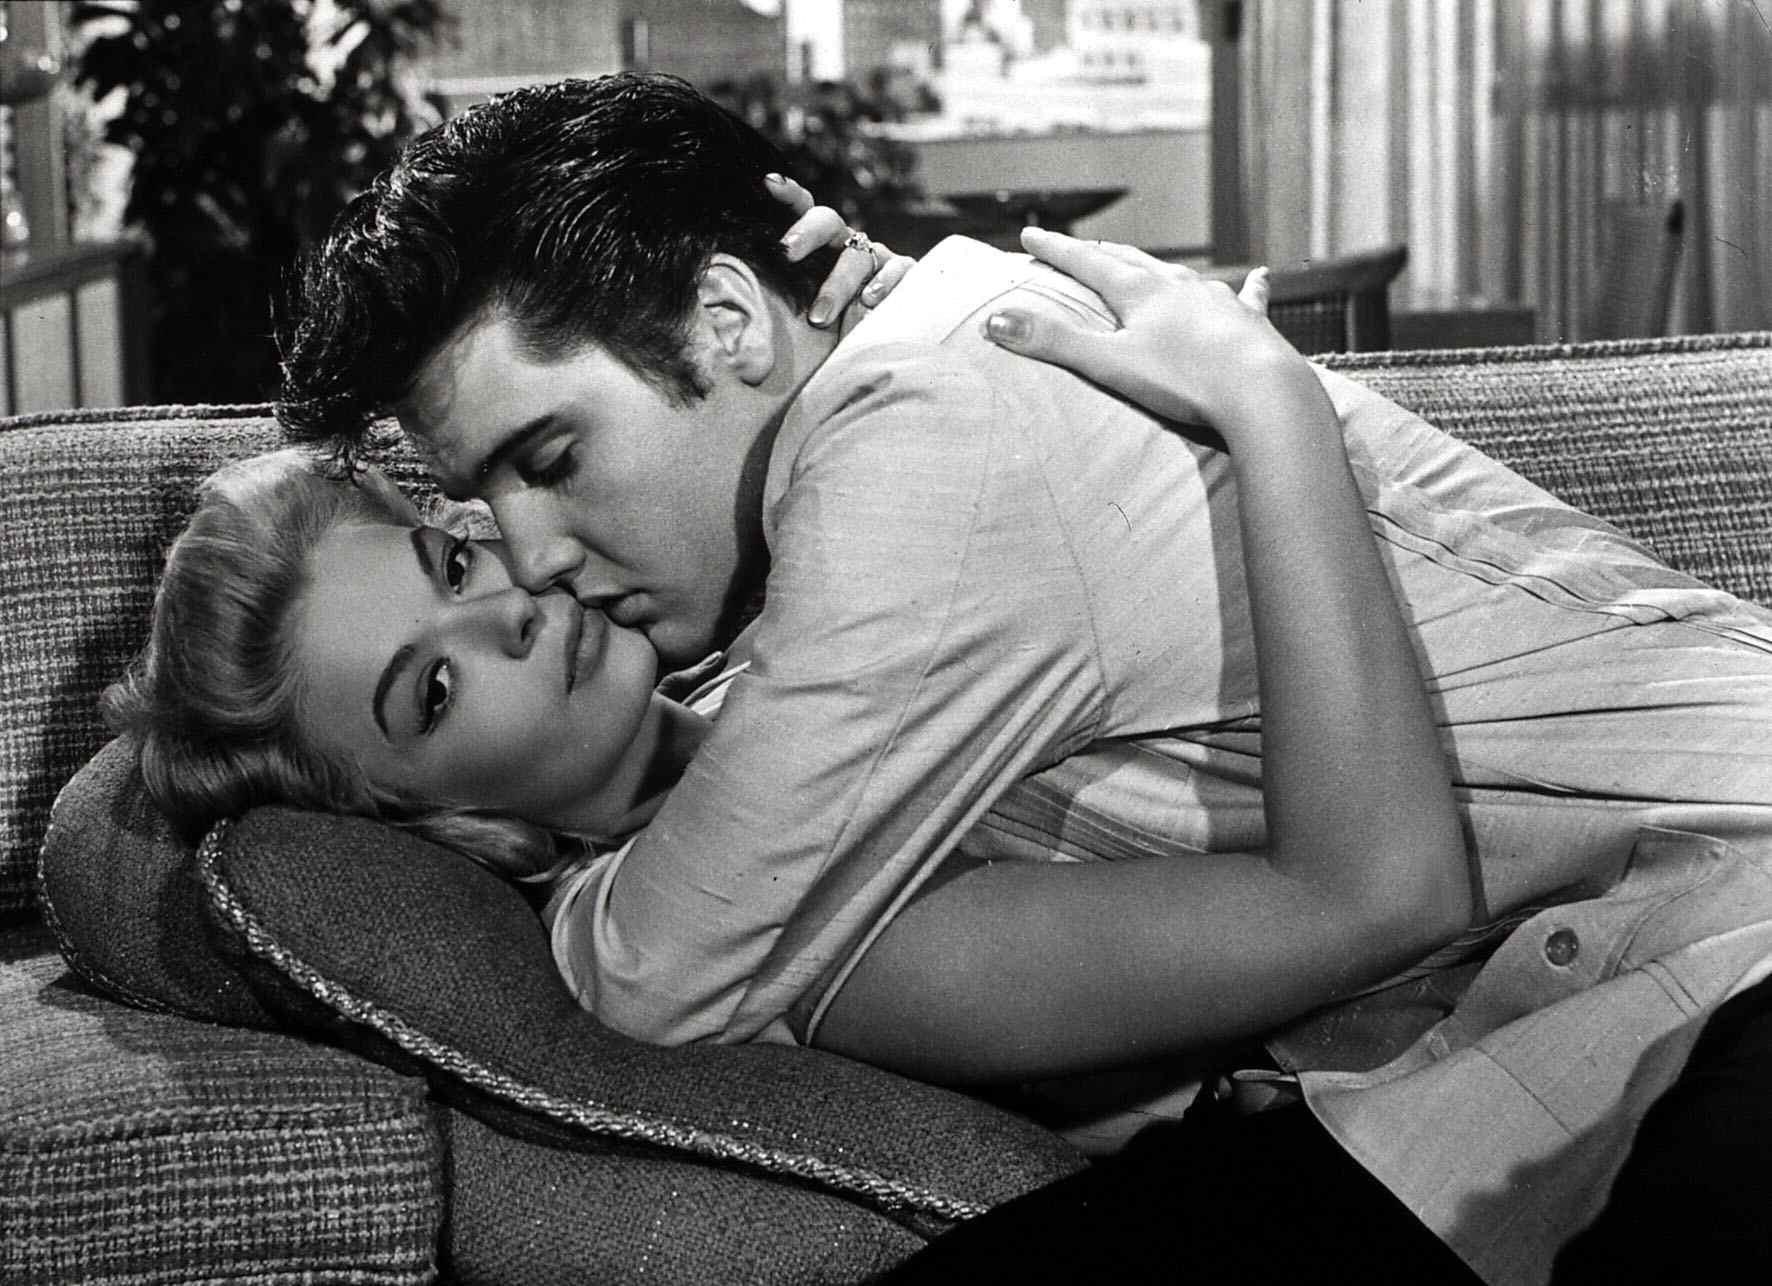 Elvis Presley and Jennifer Holden on a couch